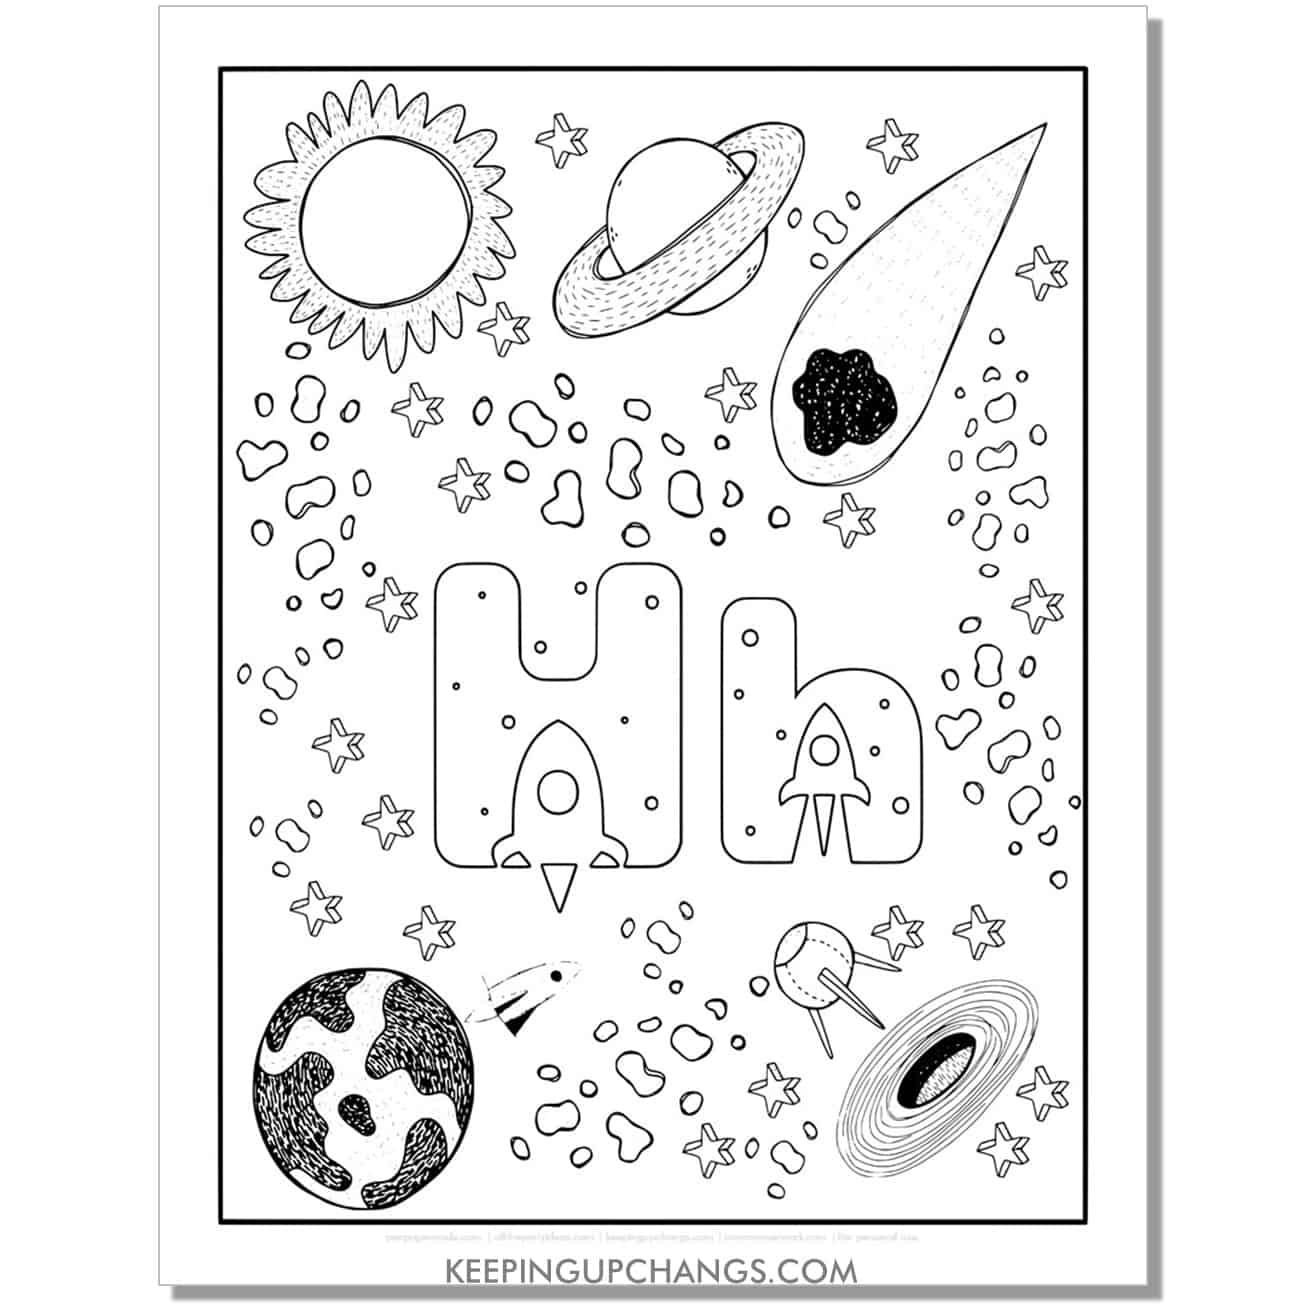 free alphabet letter h coloring page for kids with rockets, space theme.